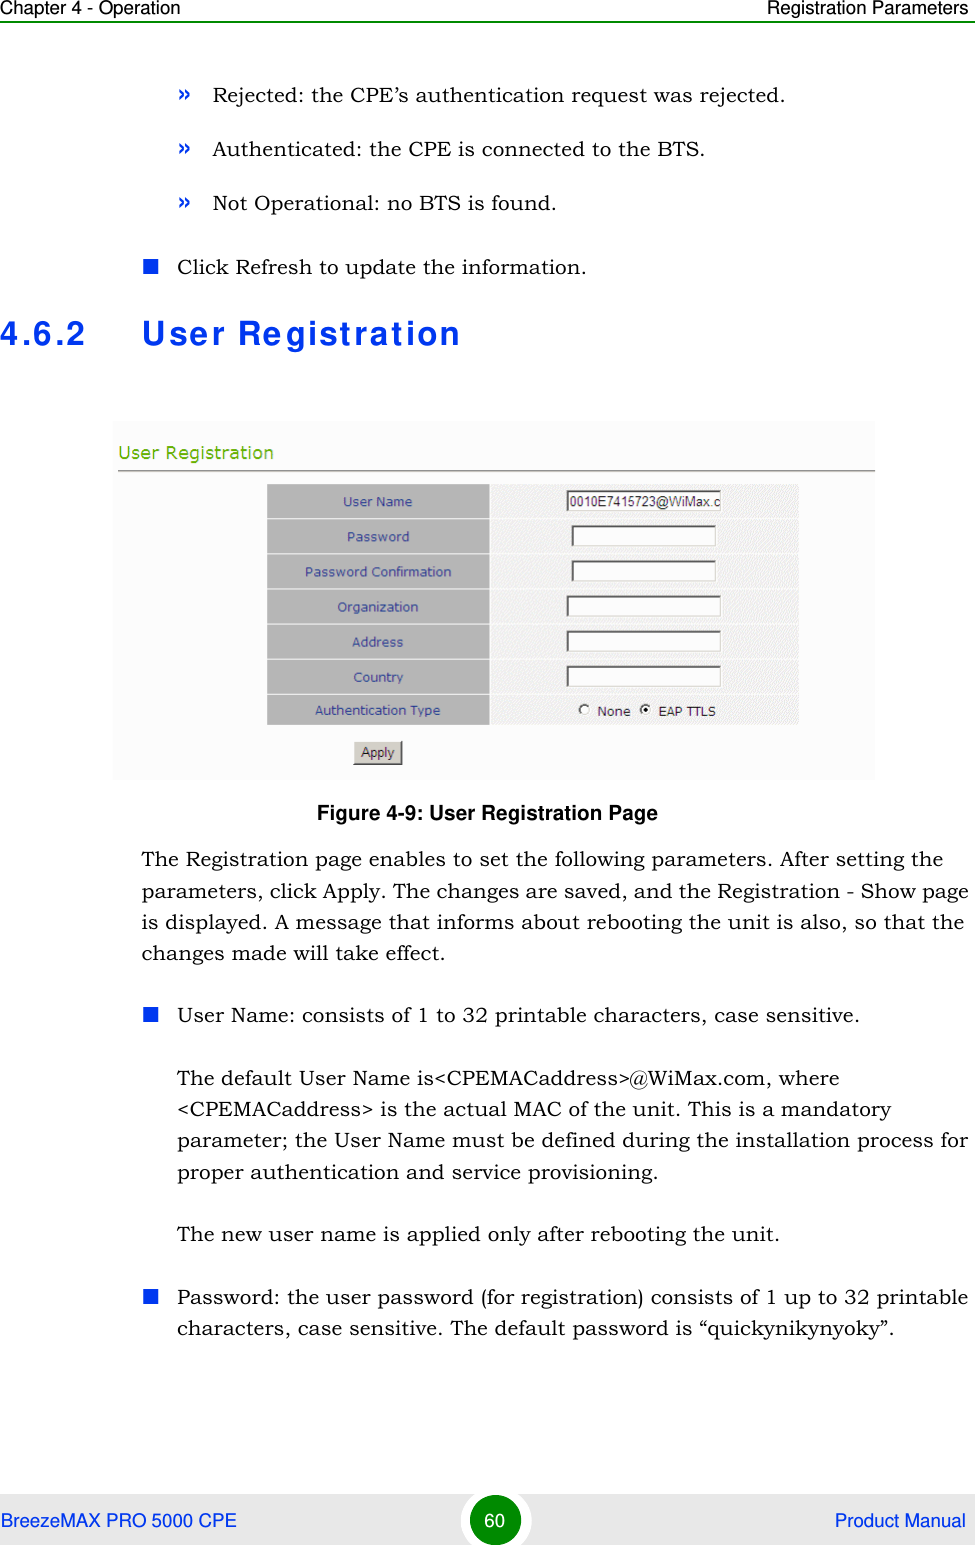 Chapter 4 - Operation Registration ParametersBreezeMAX PRO 5000 CPE 60  Product Manual»Rejected: the CPE’s authentication request was rejected.»Authenticated: the CPE is connected to the BTS.»Not Operational: no BTS is found.Click Refresh to update the information.4.6.2 User Re gistrationThe Registration page enables to set the following parameters. After setting the parameters, click Apply. The changes are saved, and the Registration - Show page is displayed. A message that informs about rebooting the unit is also, so that the changes made will take effect.User Name: consists of 1 to 32 printable characters, case sensitive.The default User Name is&lt;CPEMACaddress&gt;@WiMax.com, where &lt;CPEMACaddress&gt; is the actual MAC of the unit. This is a mandatory parameter; the User Name must be defined during the installation process for proper authentication and service provisioning.The new user name is applied only after rebooting the unit.Password: the user password (for registration) consists of 1 up to 32 printable characters, case sensitive. The default password is “quickynikynyoky”.Figure 4-9: User Registration Page